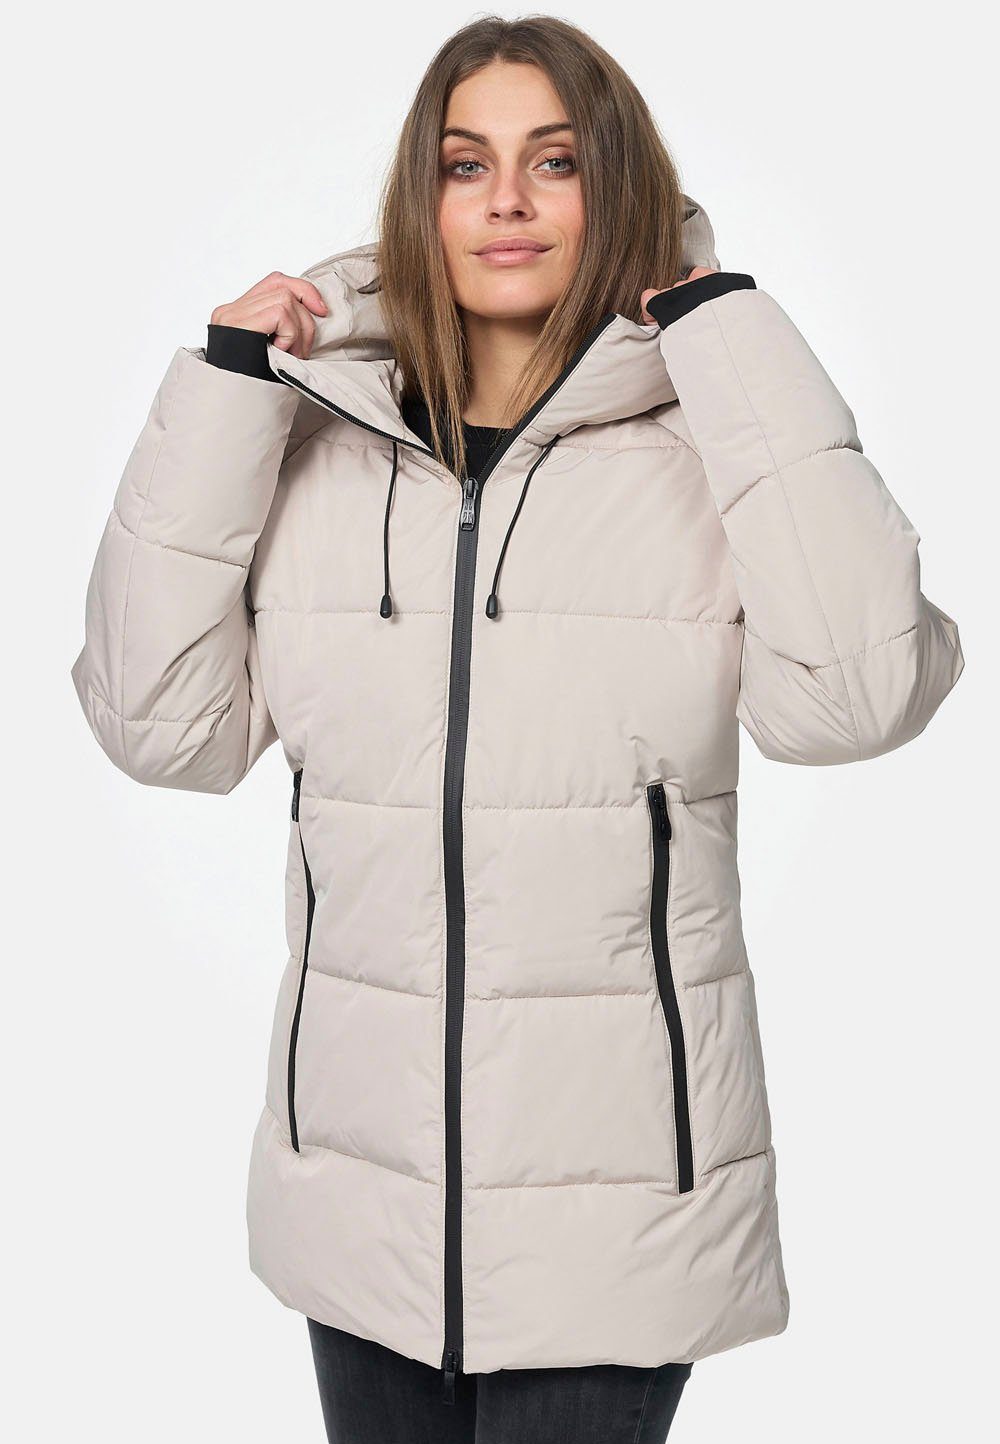 Lonsdale Outdoorjacke Sand SALLY